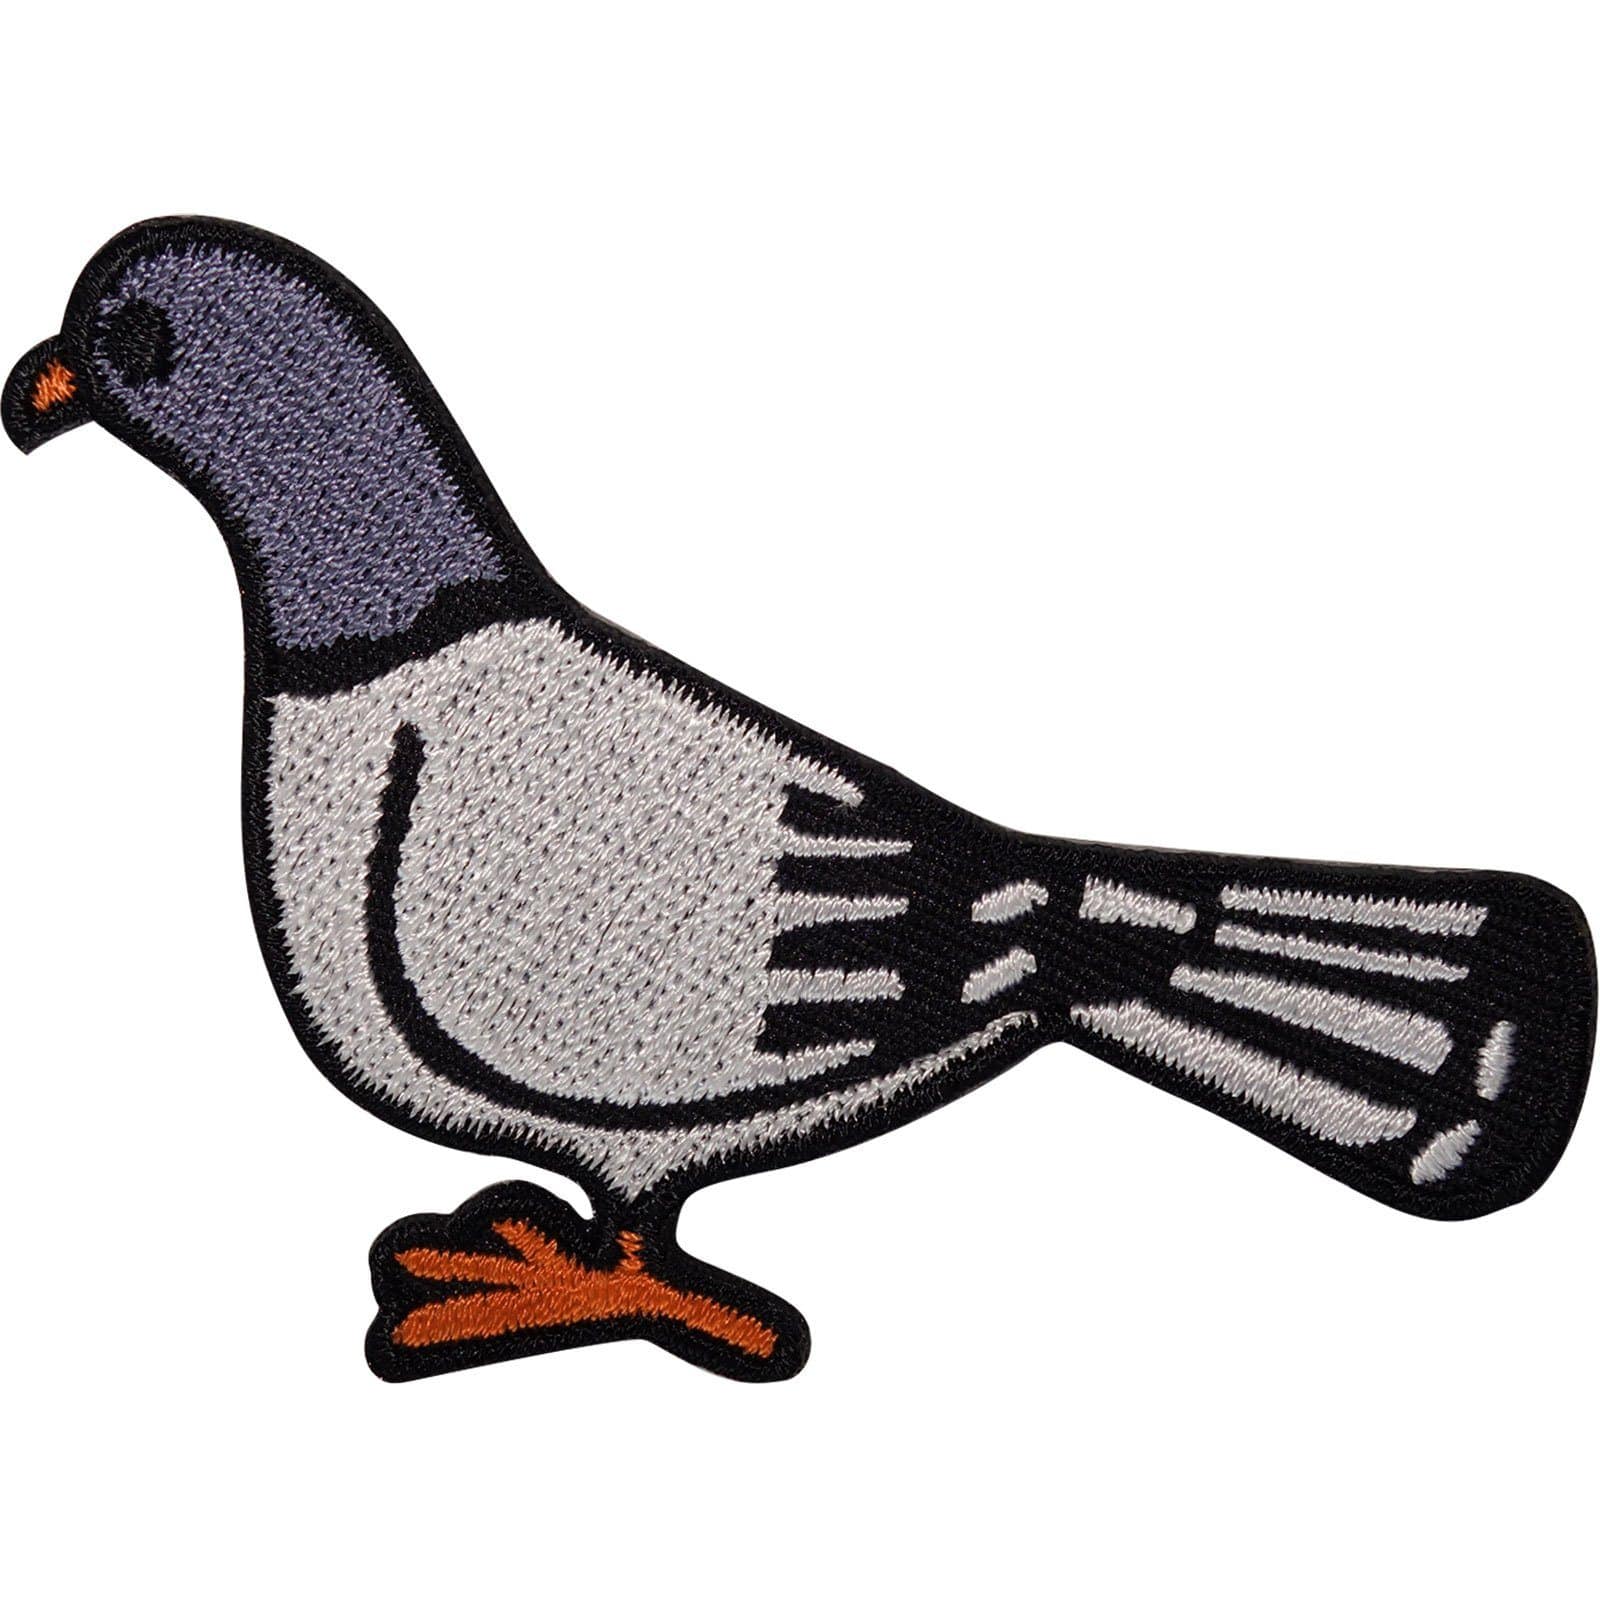 Pigeon Patch Iron Sew On Clothes Bag Bird Embroidered Badge Embroidery Applique